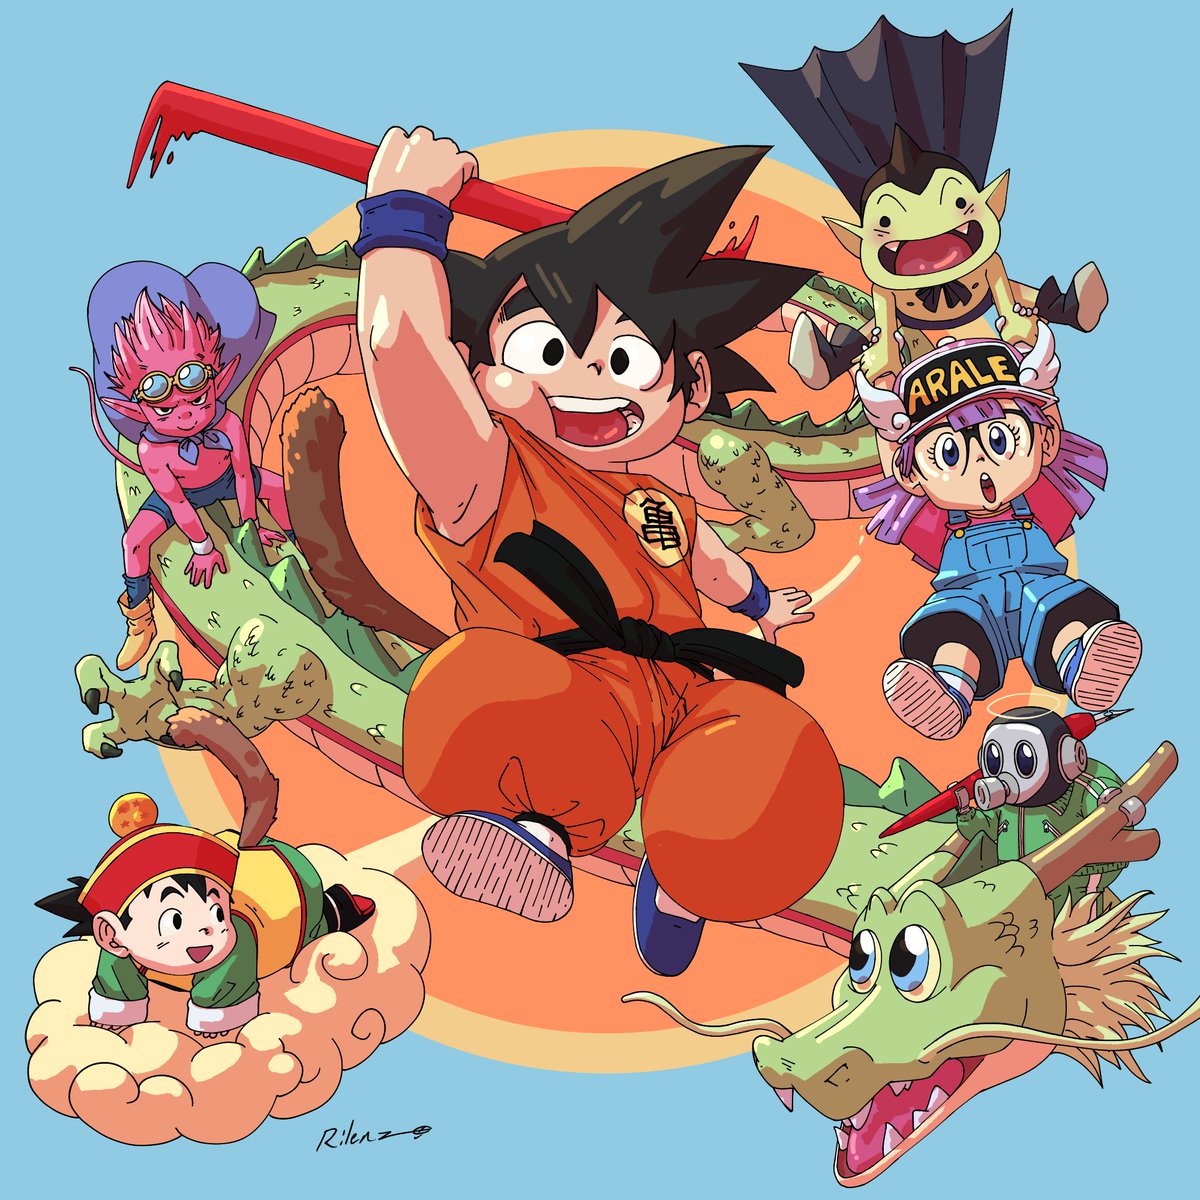 Look here! I know it's been some time, but I finally drew my tribute for Akira Toriyama 🥹 His work has been a huge inspiration to me throughout my art journey; he created so many amazing worlds and characters, I doubt there'll be anyone like him again 🙏 RIP Akira Toriyama ❤️